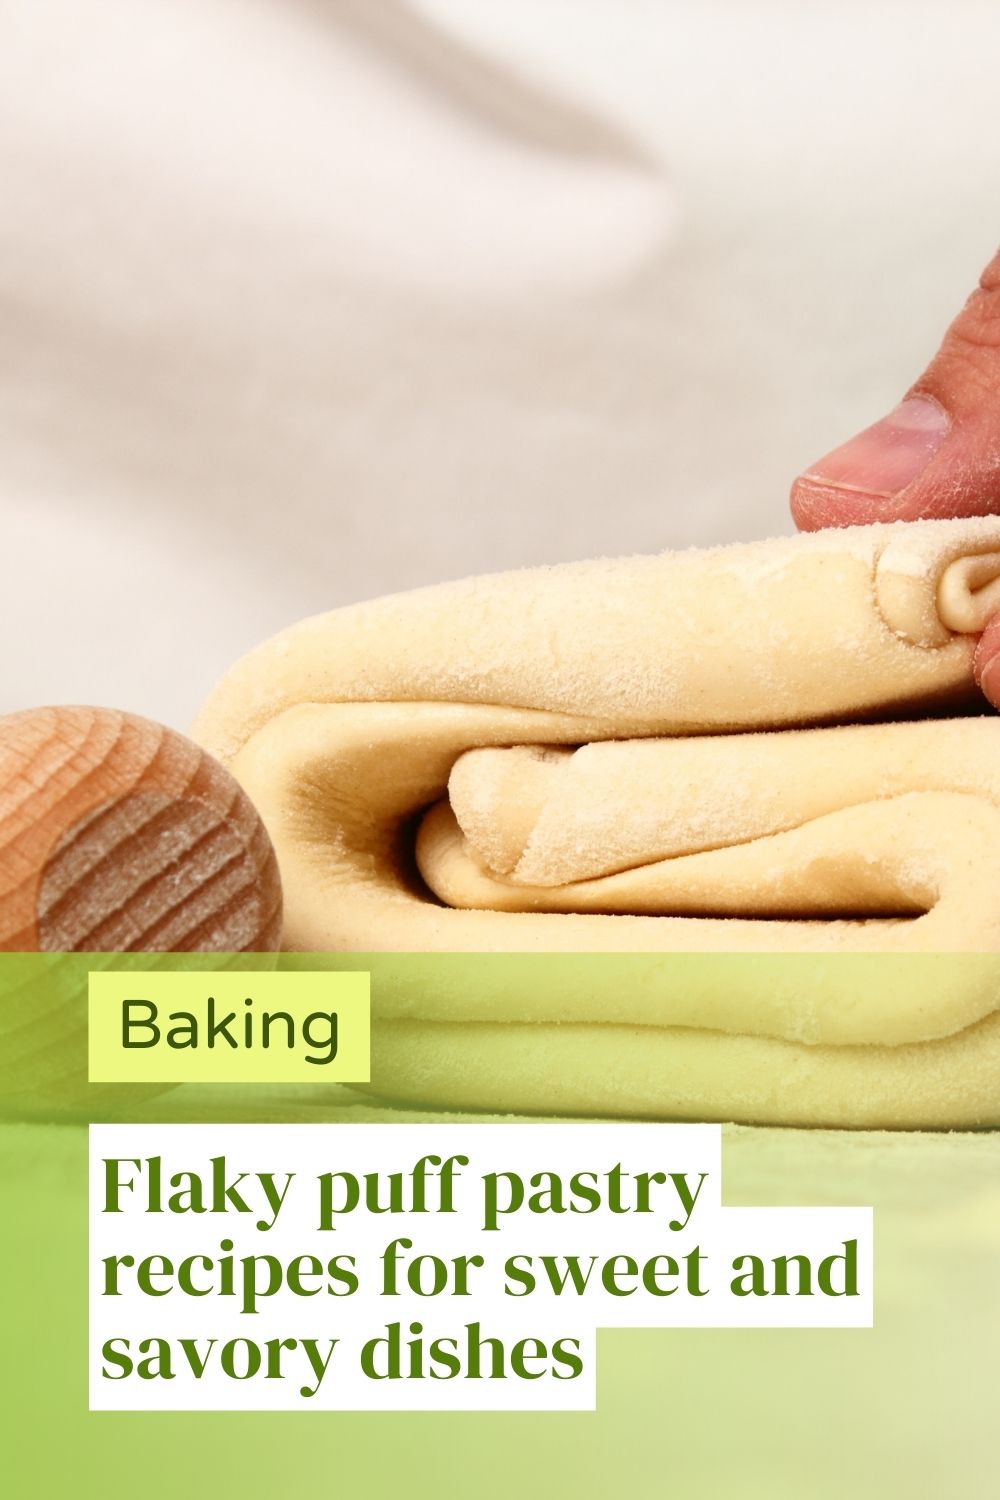  Flaky puff pastry recipes for sweet and savory dishes